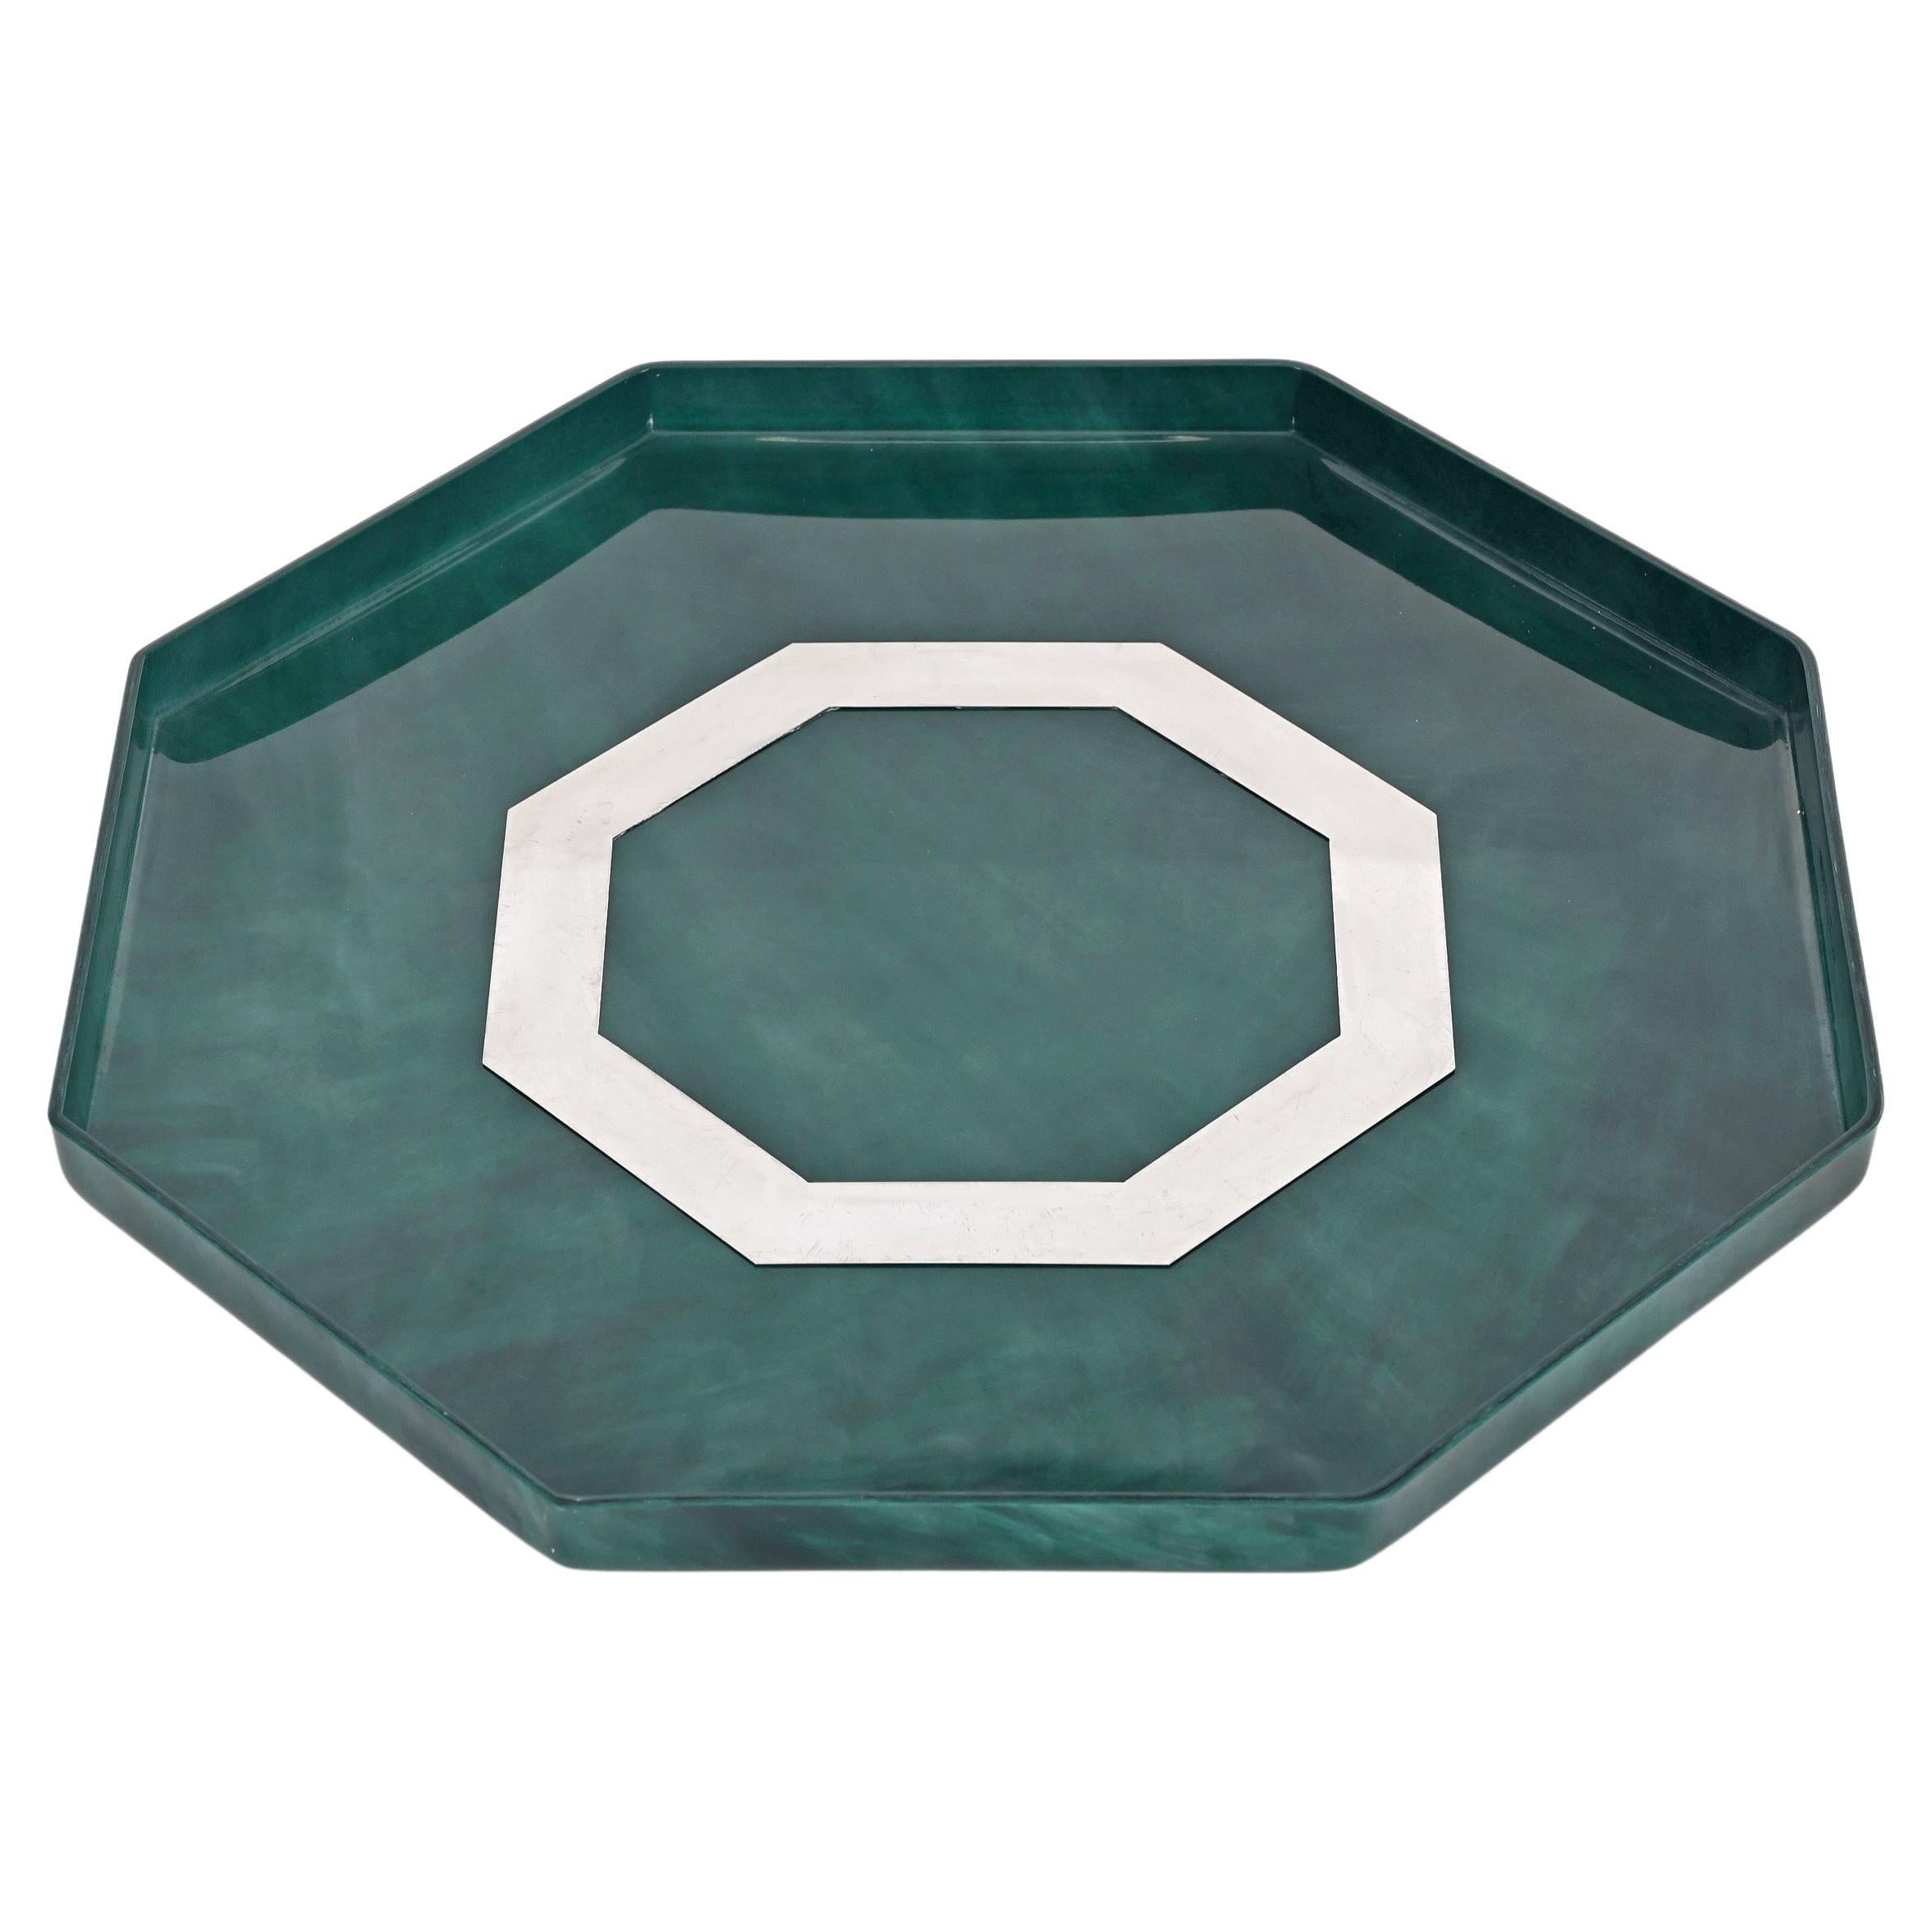 Midcentury Marble Effect Lucite and Steel Octagonal Serving Tray, Italy, 1980s